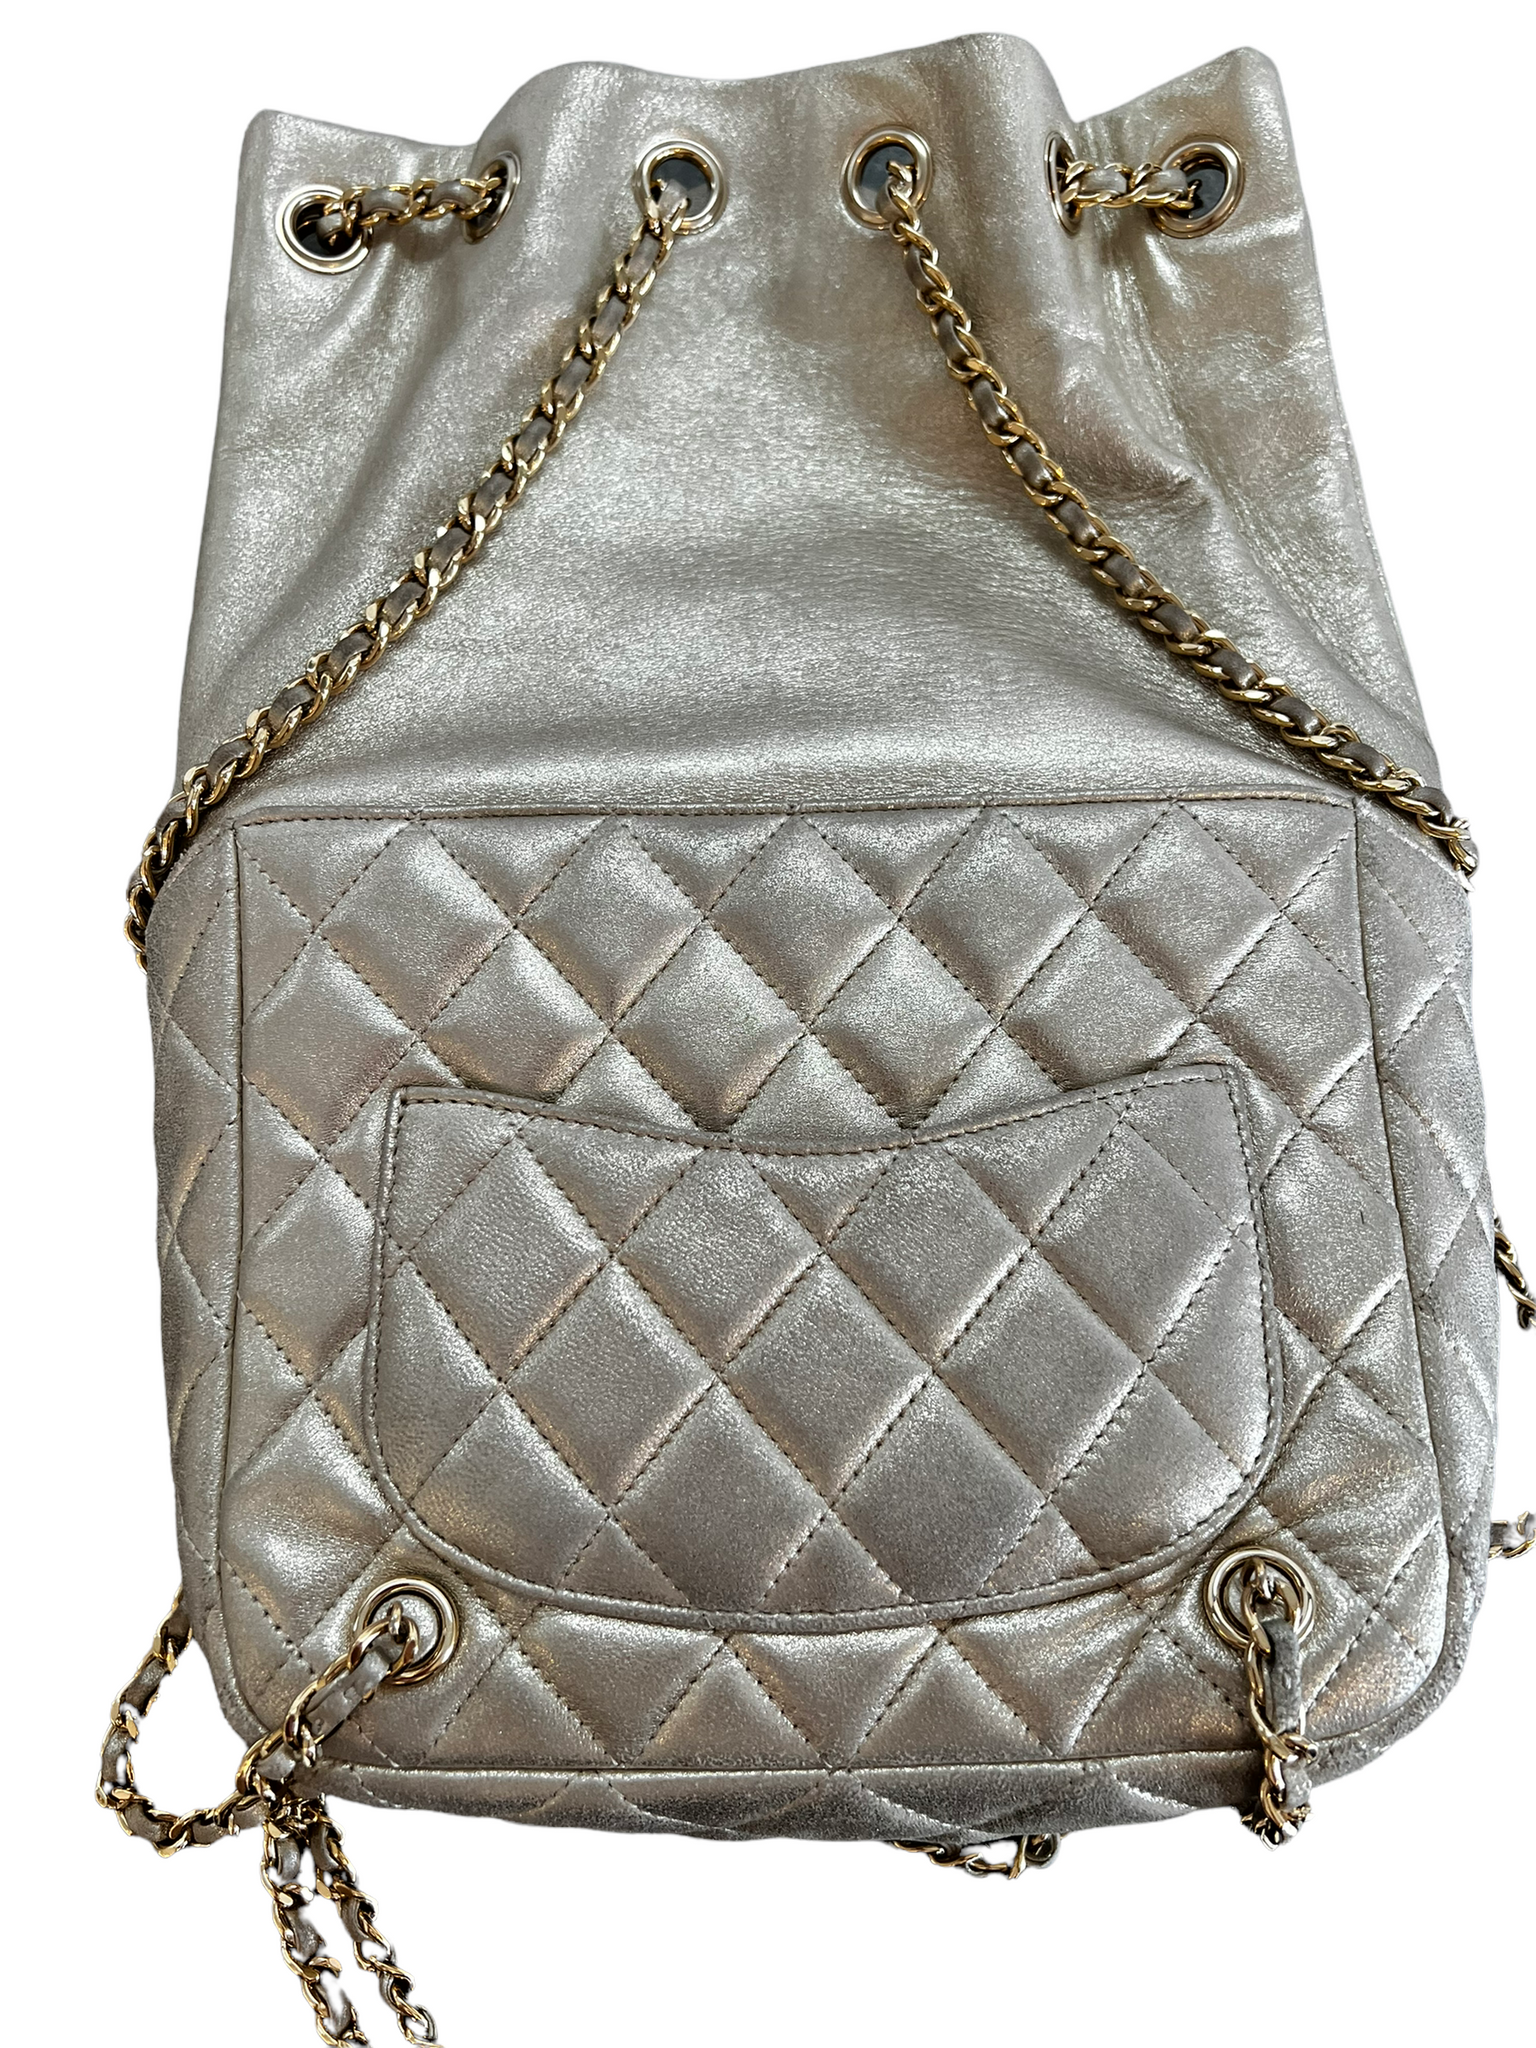 Chanel Metallic Gold Quilted Calfskin Small Gabrielle Backpack